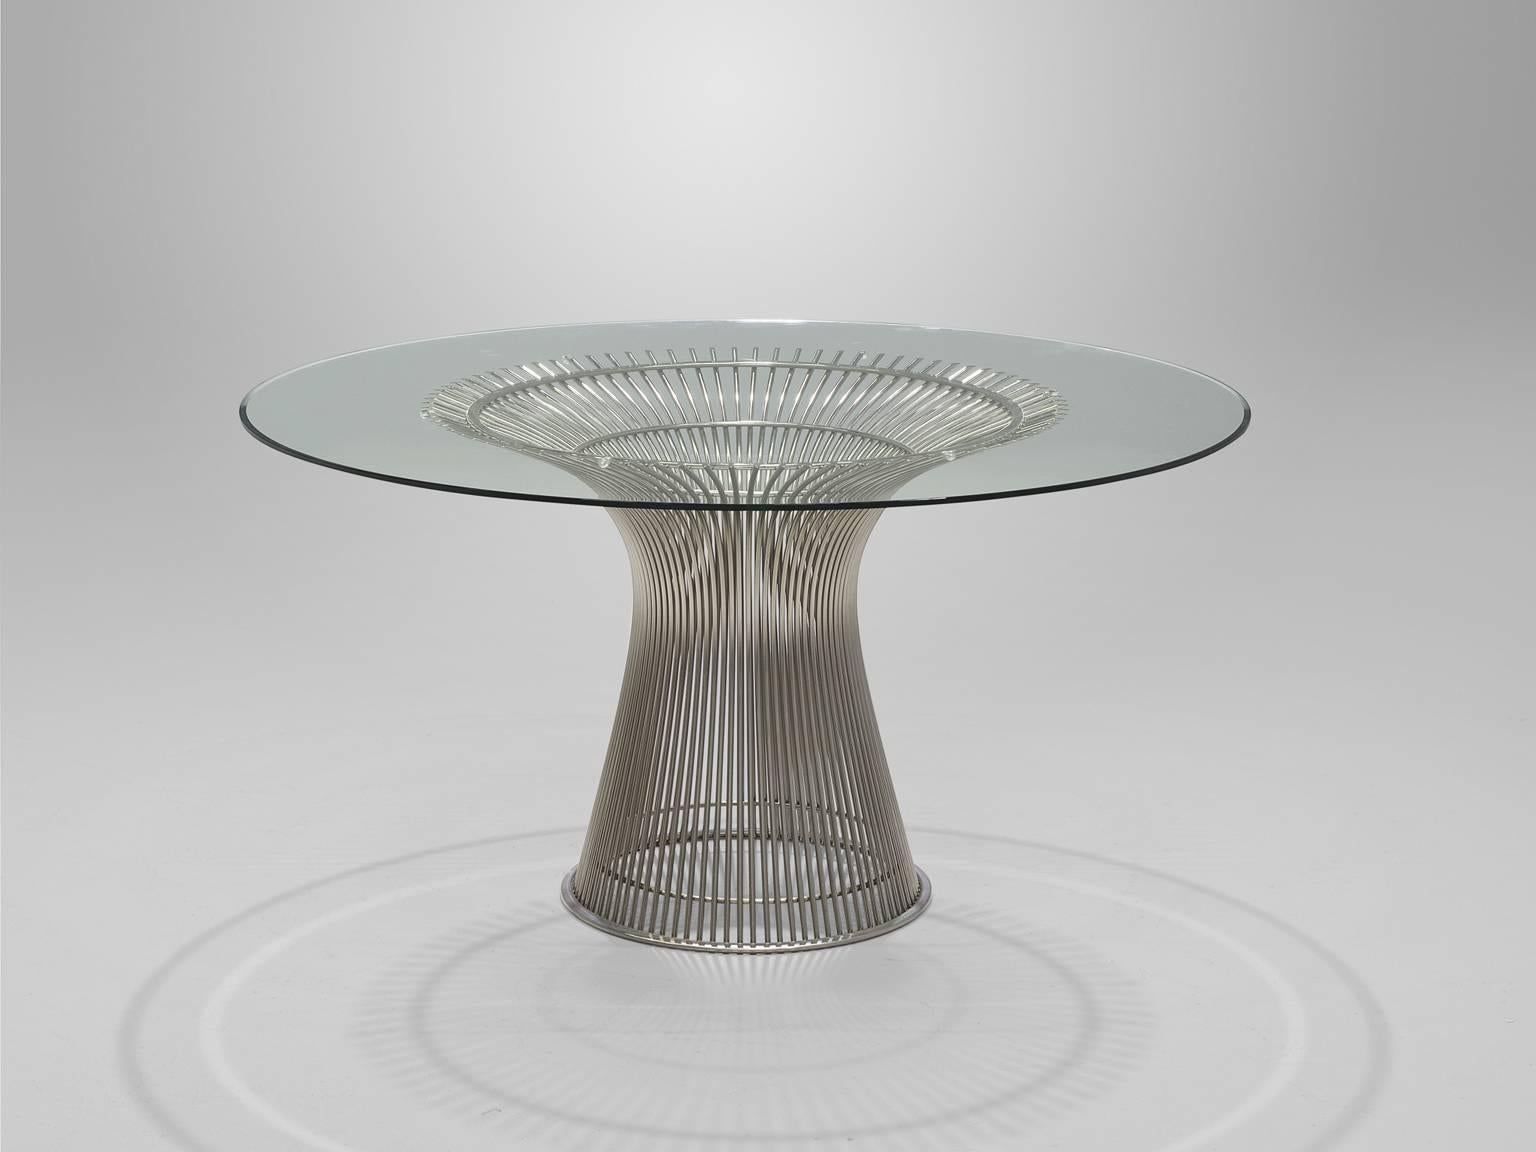 Warren Platner for Knoll, table, glass and metal, United States, 1966, 1980s production. 

This iconic dining table by Warren Platner (1919-2006) is created by welding curved steel rods to circular and semi-circular frames, simultaneously serving